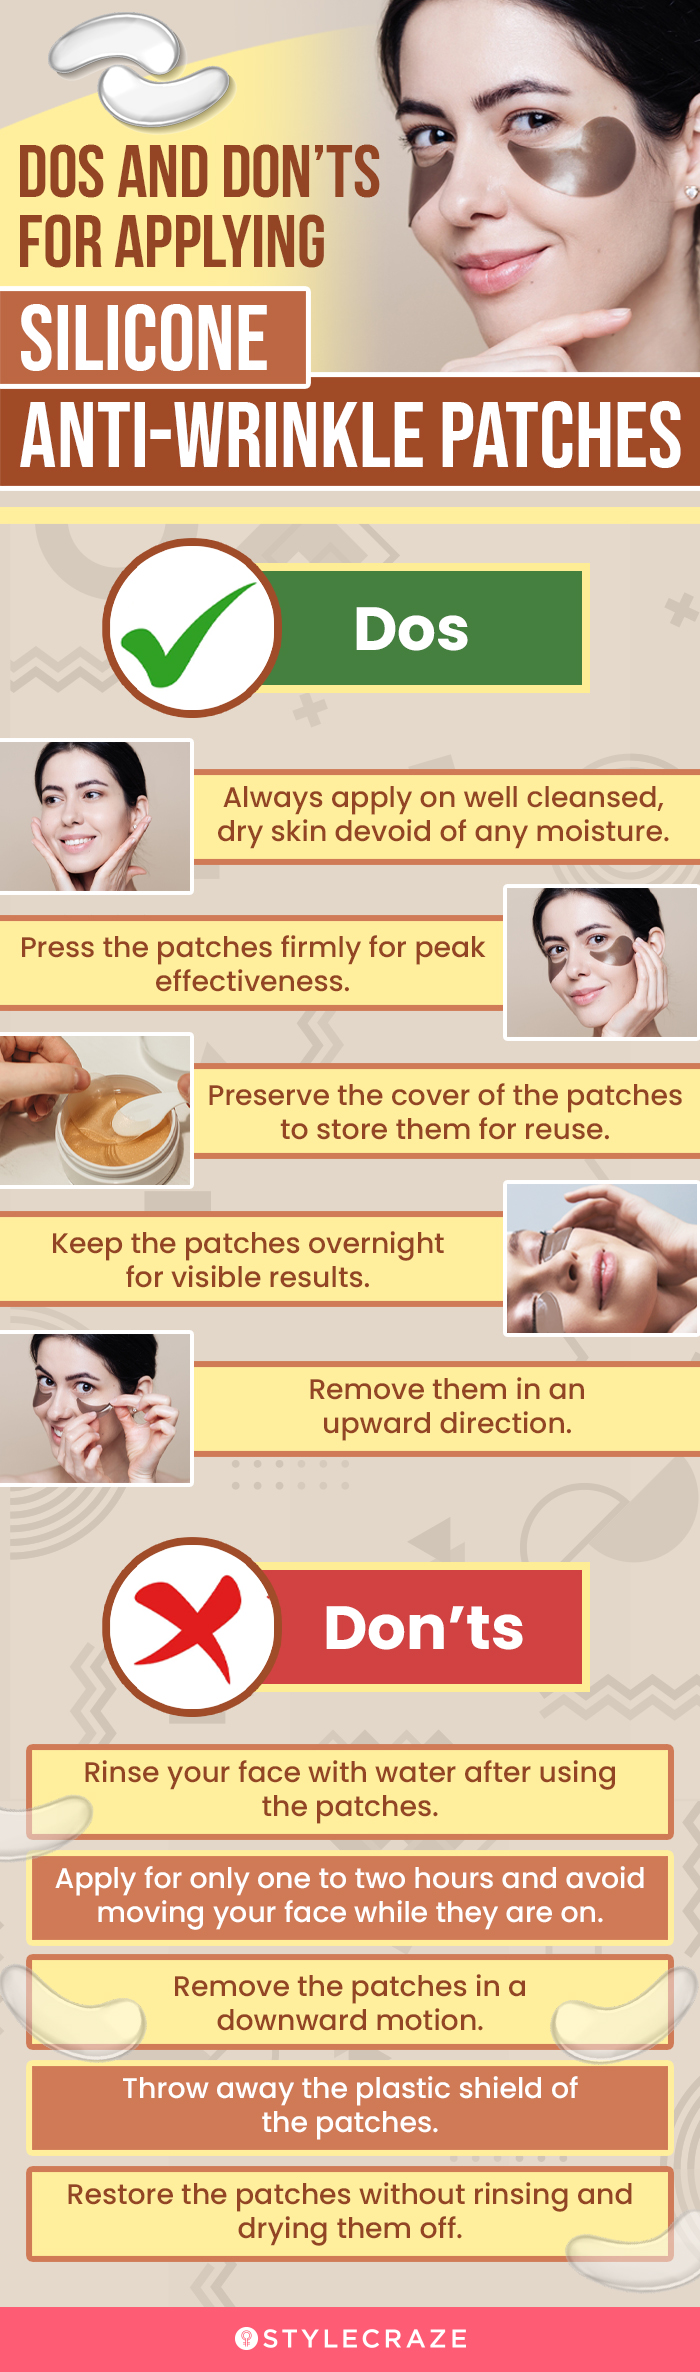 Do’s And Don’ts For Applying Silicone Anti-Wrinkle Patches [infographic]